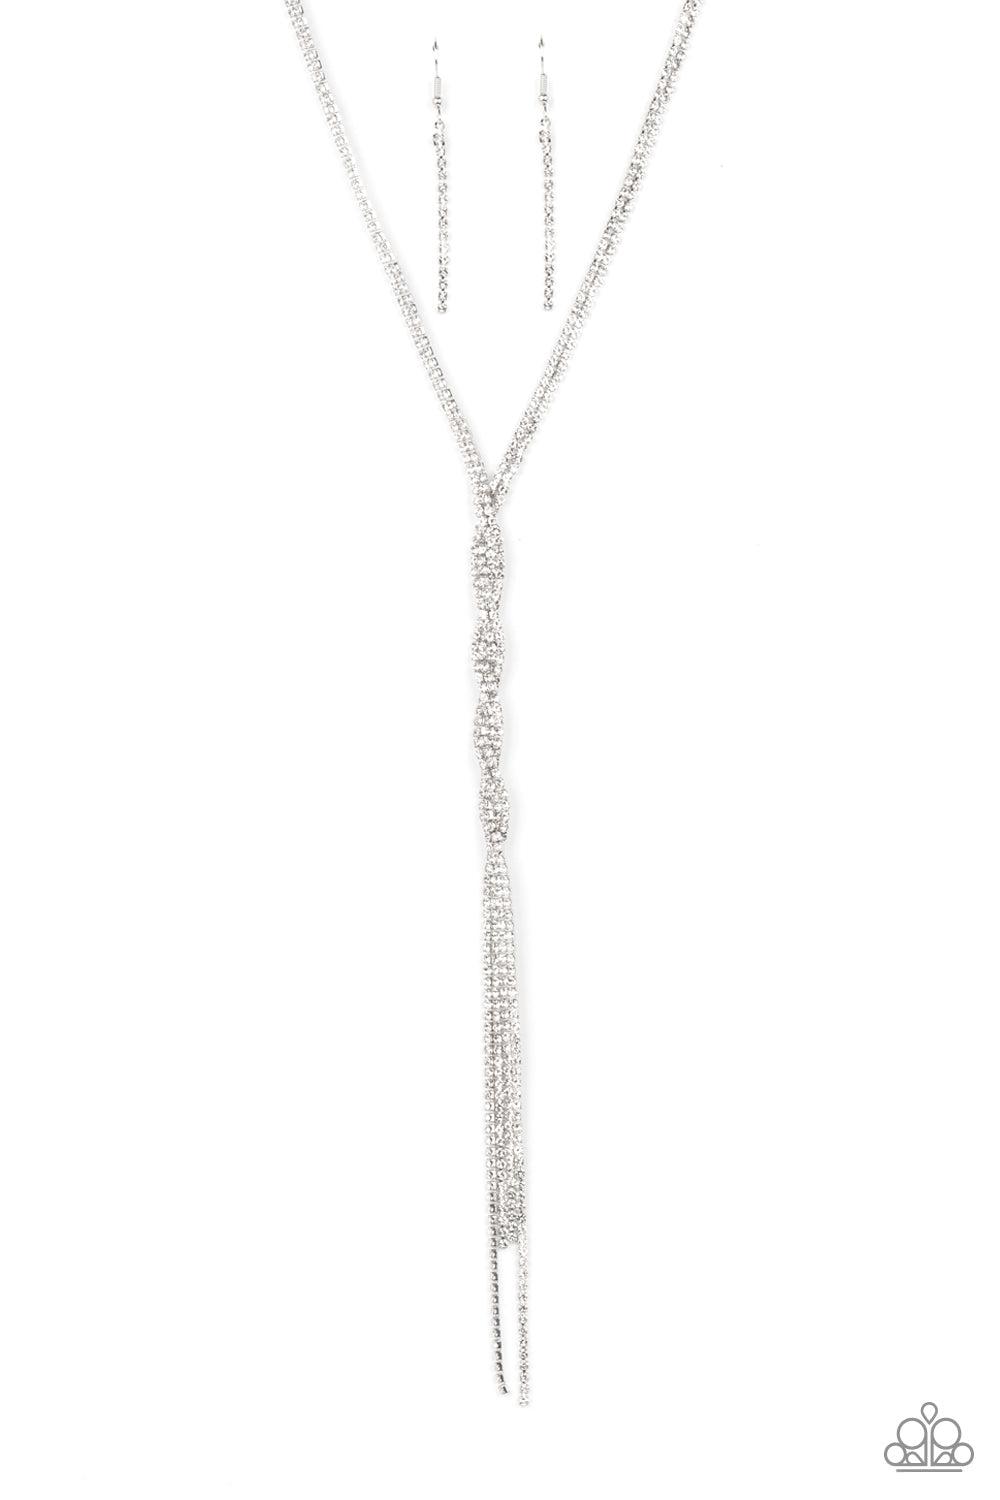 Impressively Icy White Necklace - Paparazzi Accessories- lightbox - CarasShop.com - $5 Jewelry by Cara Jewels